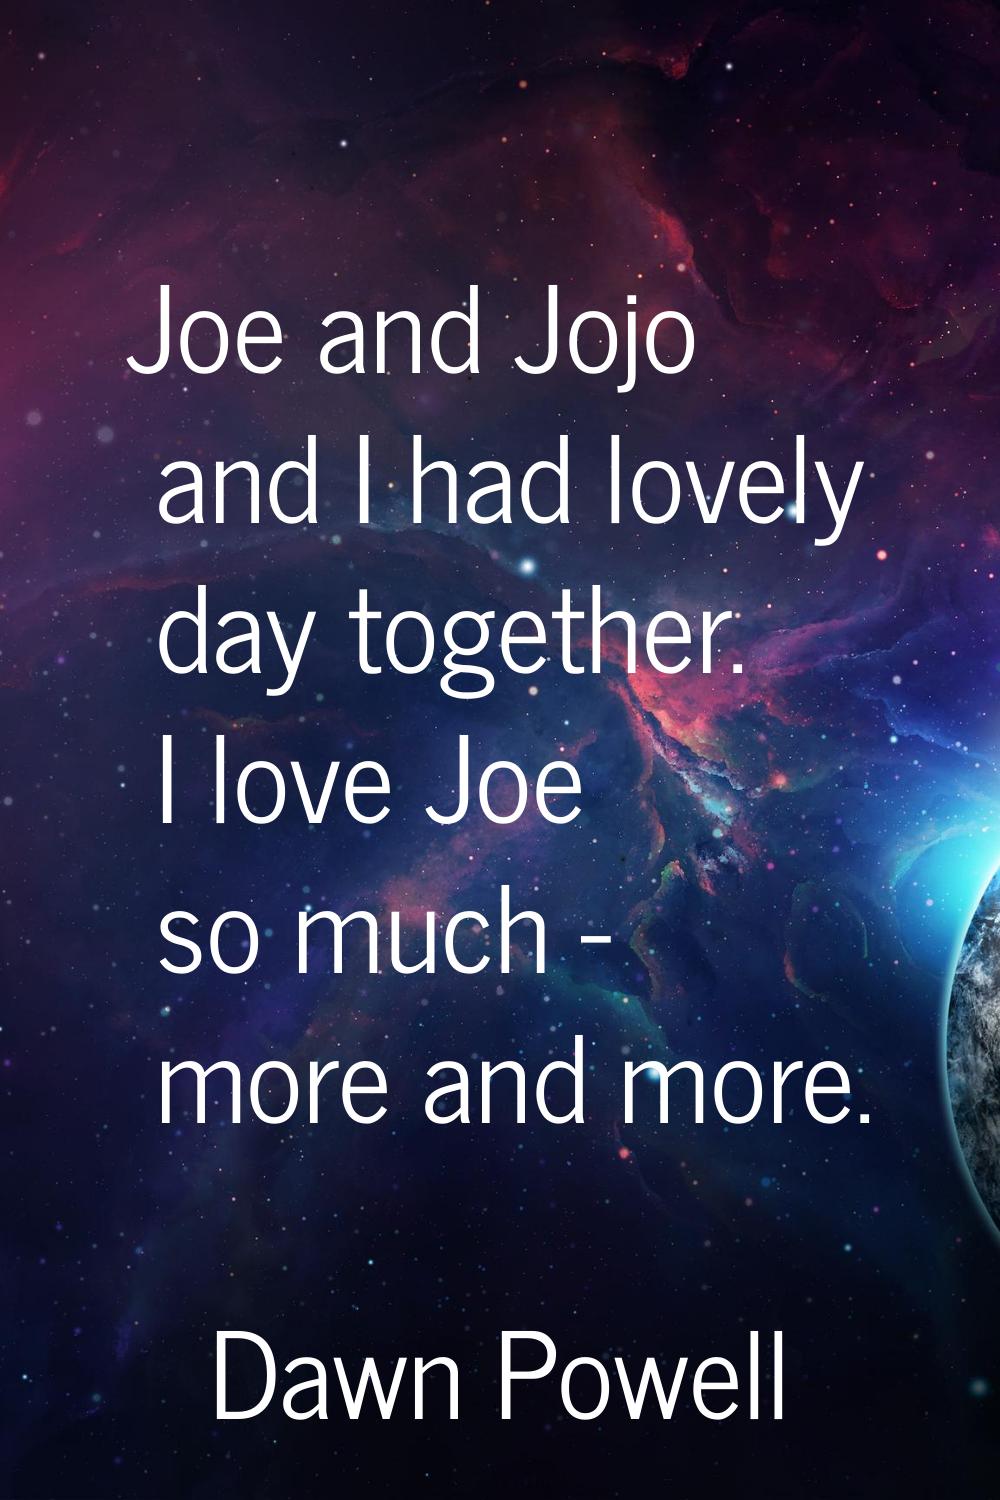 Joe and Jojo and I had lovely day together. I love Joe so much - more and more.